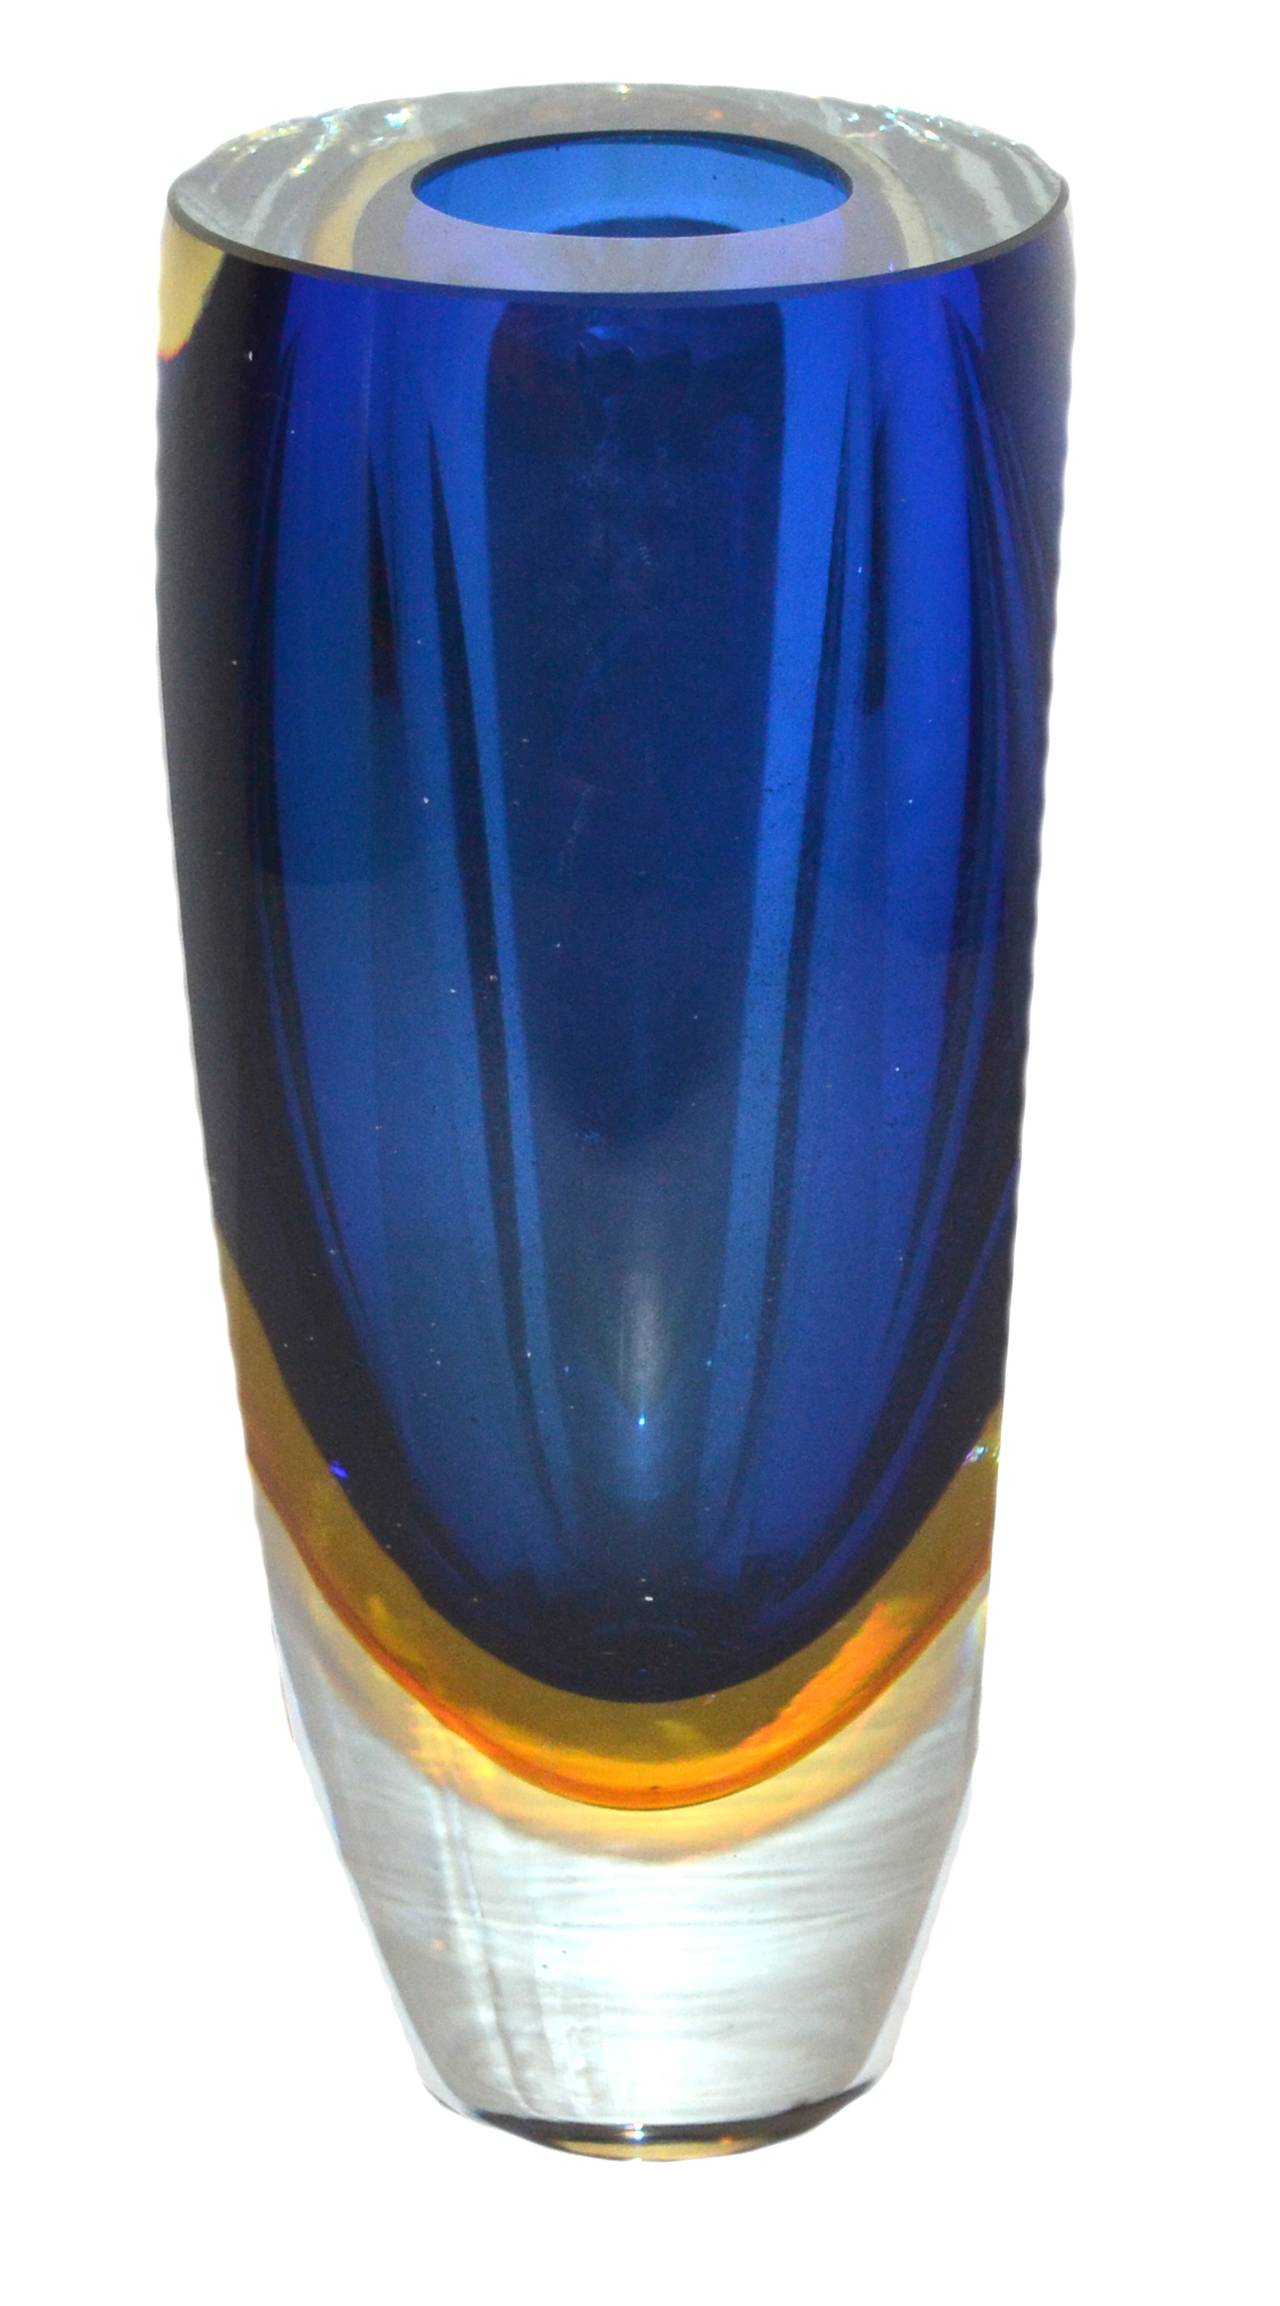 Stunning heavy Sommerso vase in blue and amber by Flavio Poli for Murano. Circa 1960s. 8